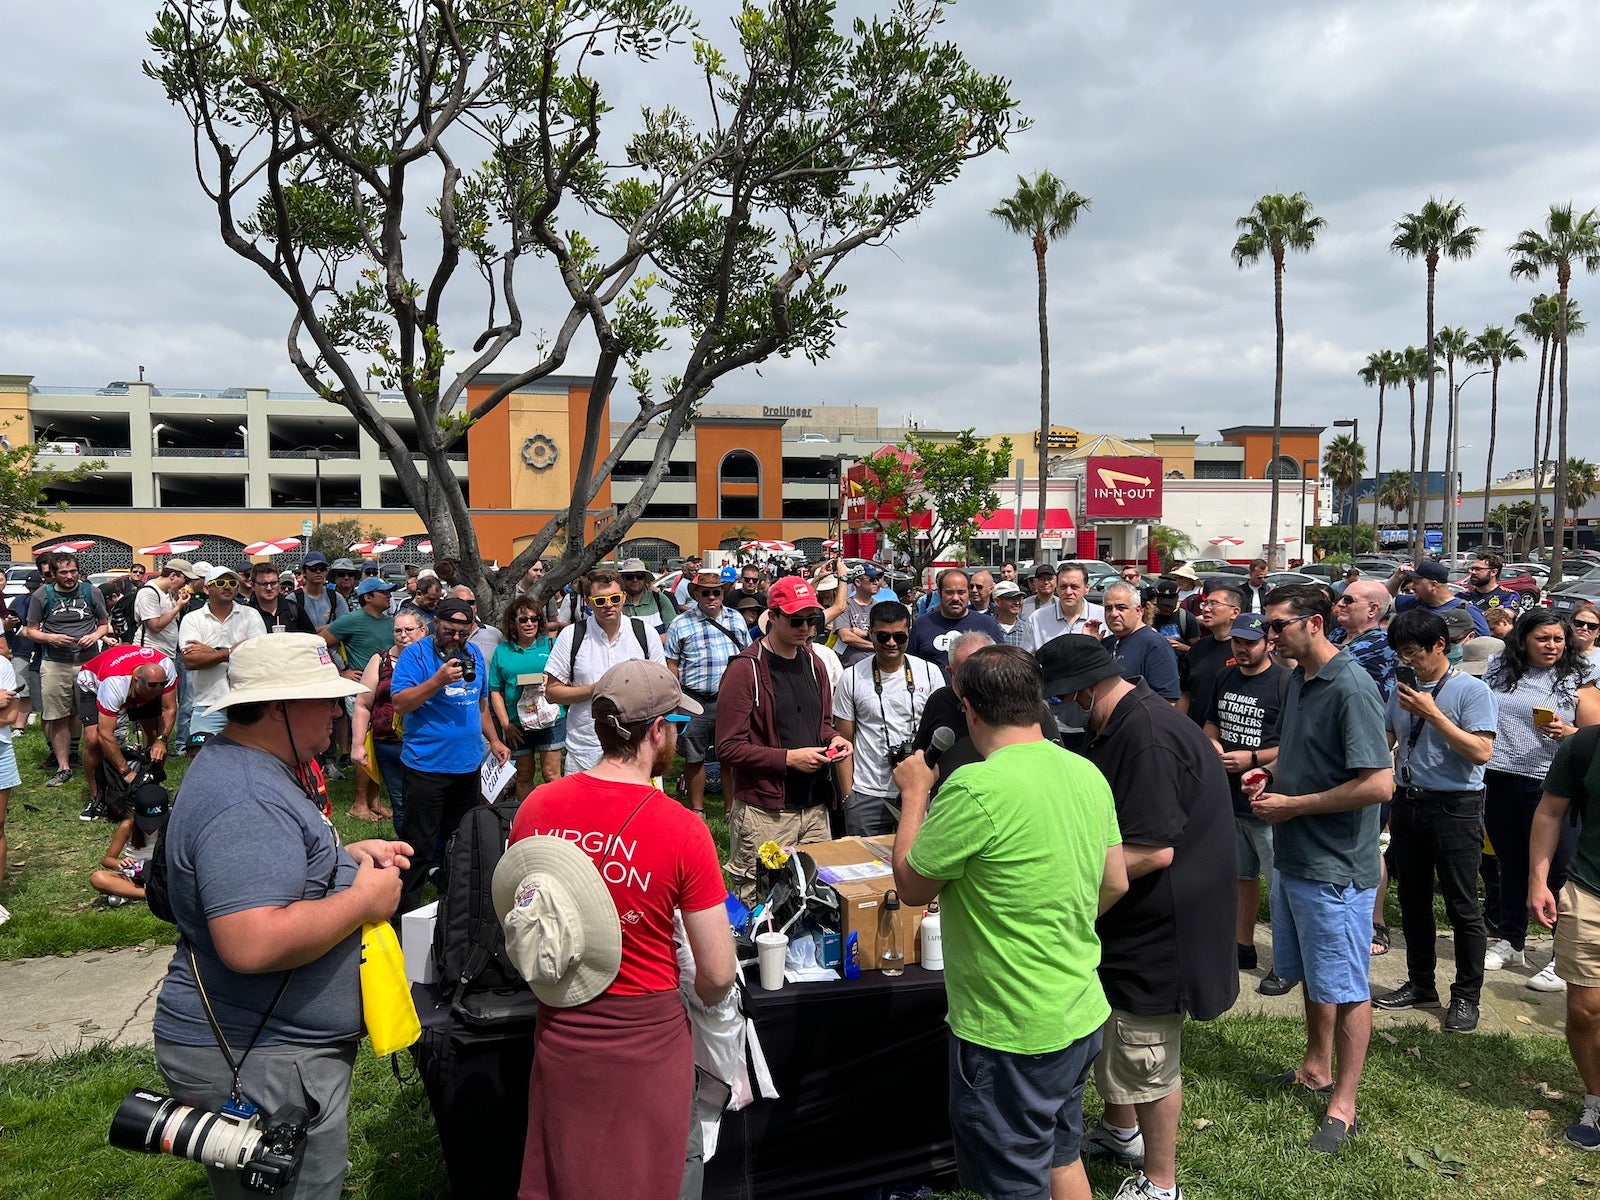 Hundreds of AvGeeks descend on LAX for annual ritual of burgers and plane spotti..